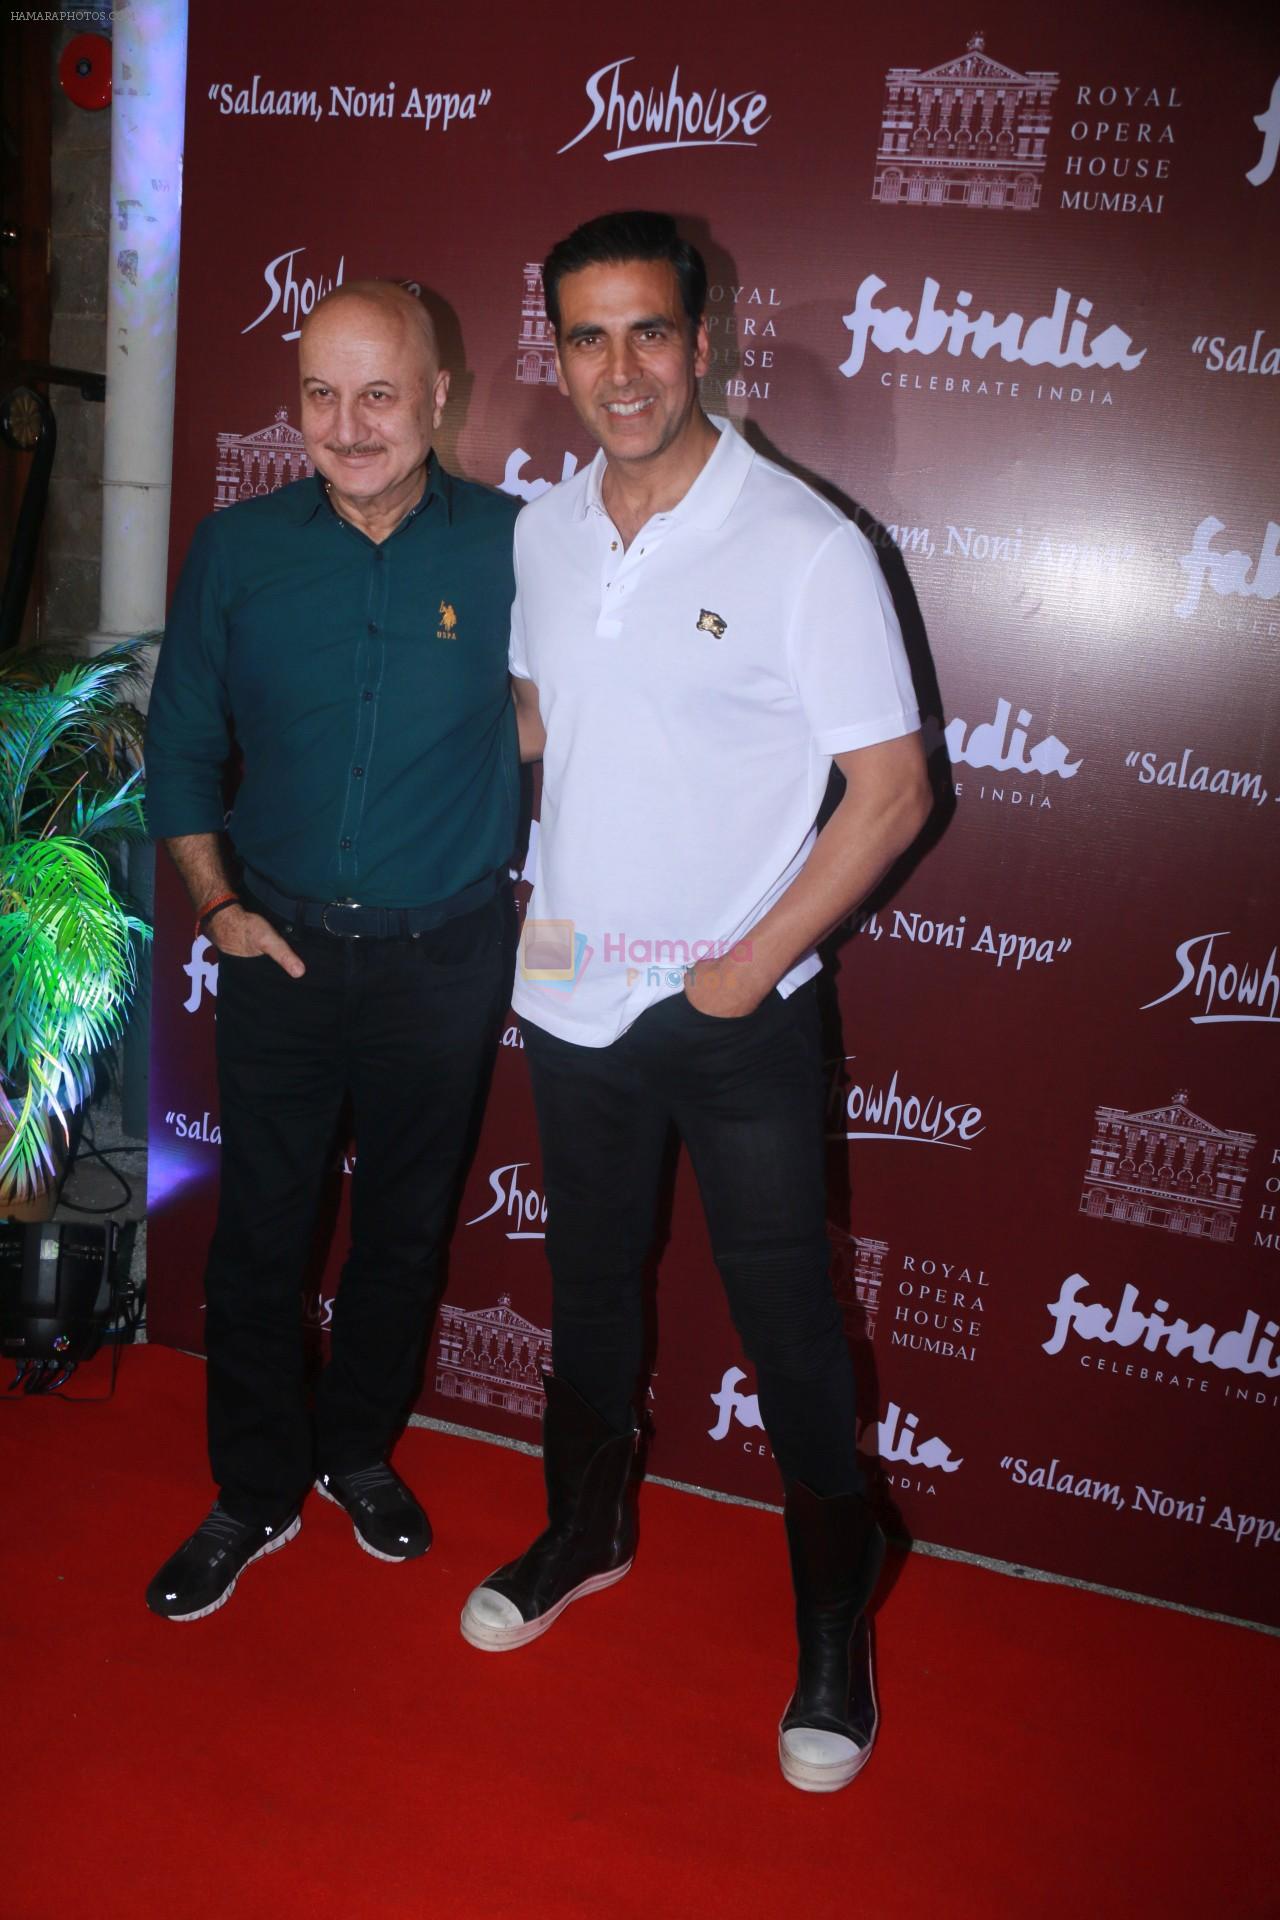 Akshay Kumar, Anupam Kher at the Special preview of Salaam Noni Appa based on Twinkle Khanna's novel at Royal Opera House in mumbai on 28th Oct 2017